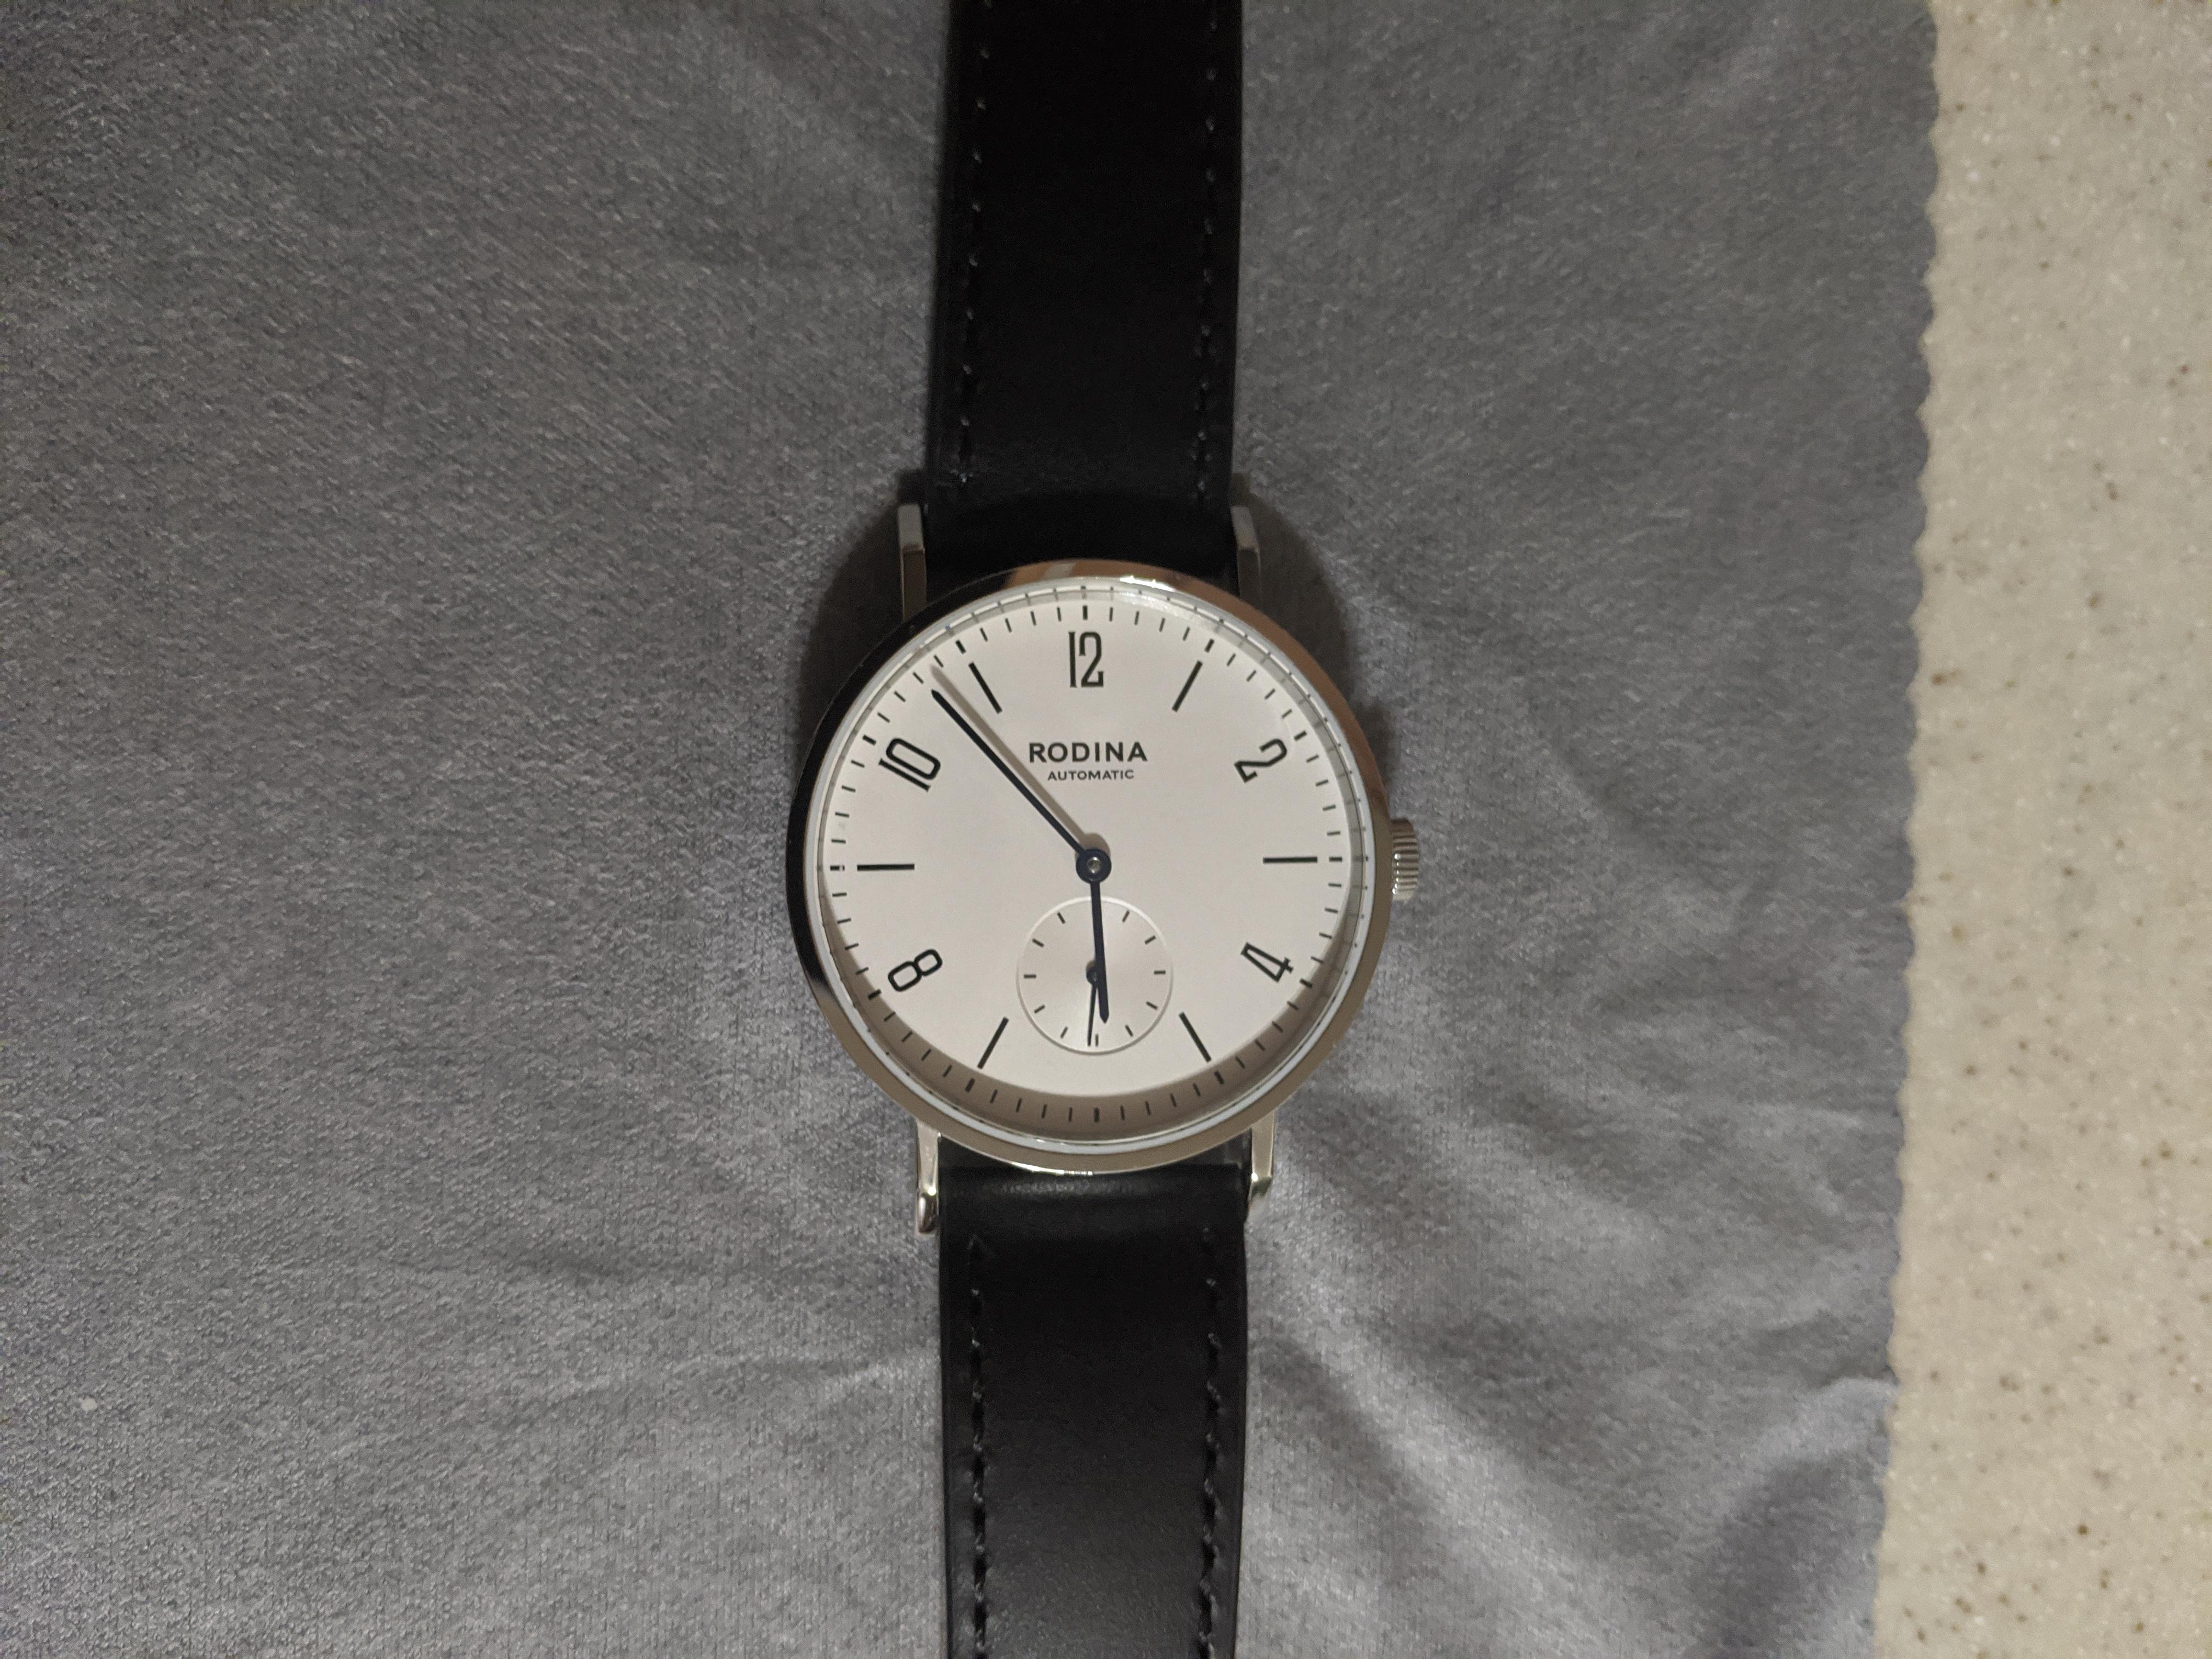 Recommendation] Brand new Rodina. What watch strap should I get? : r/Watches